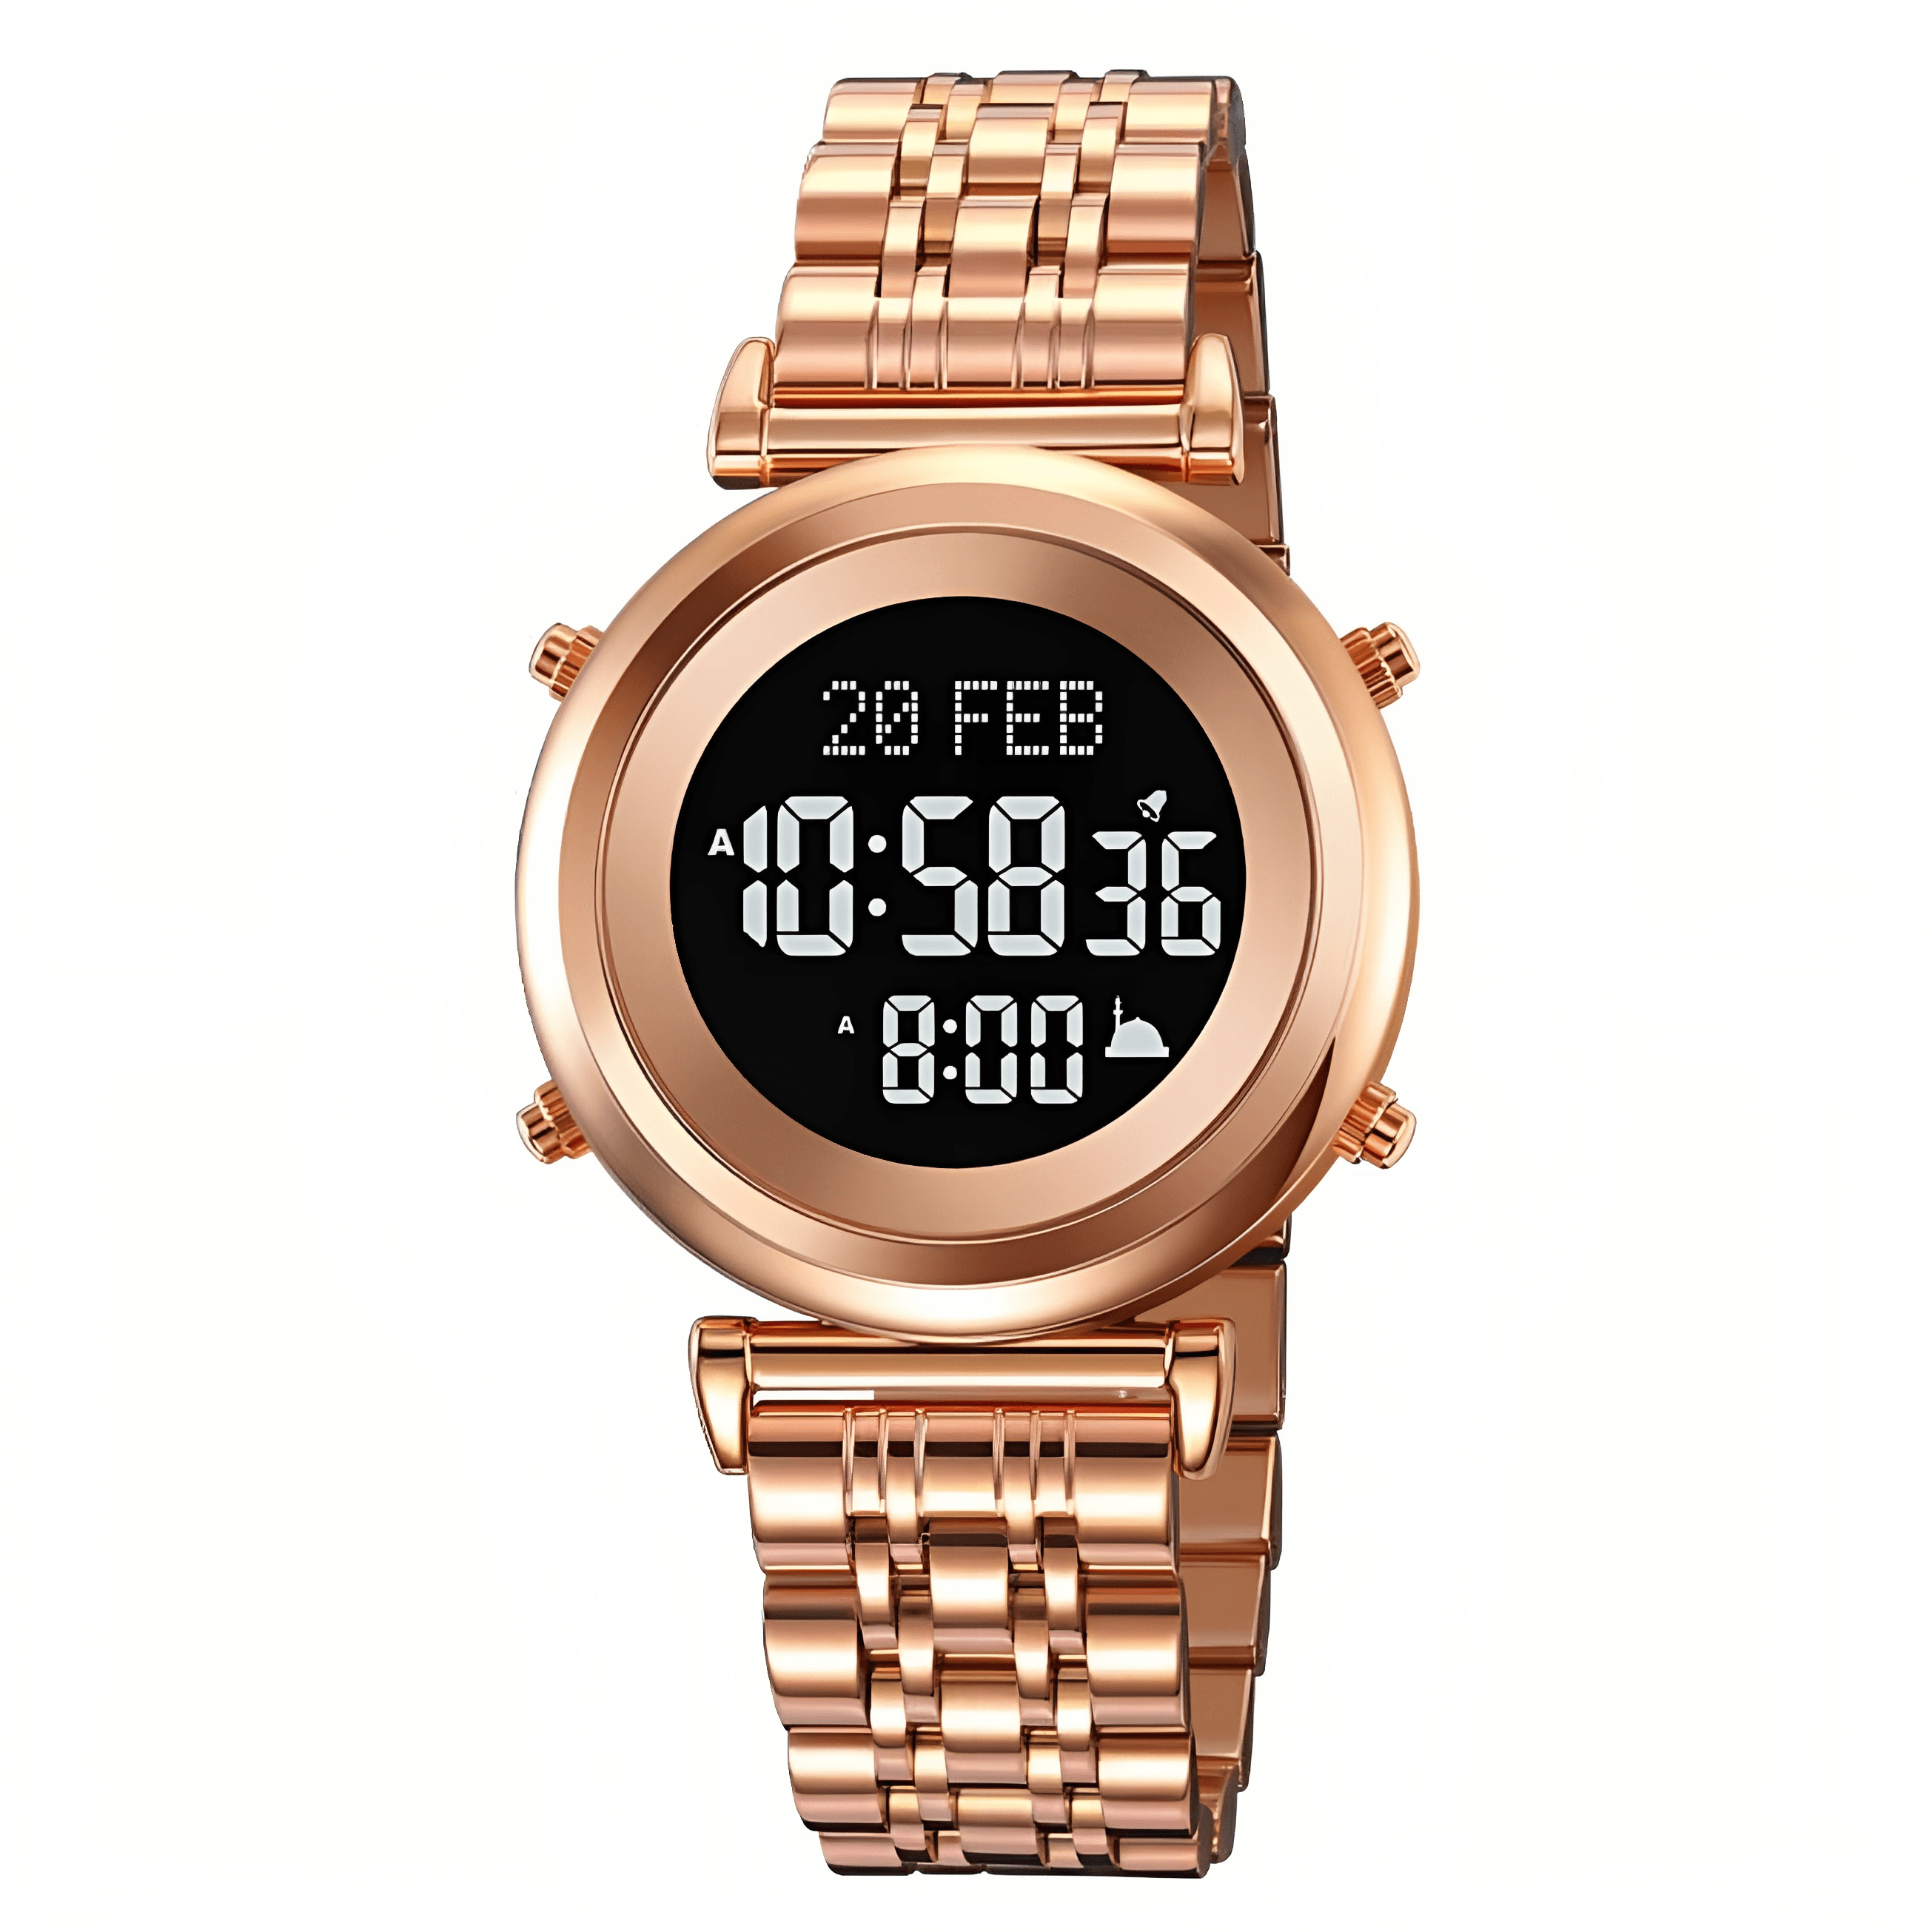 Wqt The Time Shop in Suchitra Junction,Hyderabad - Best Wrist Watch Dealers  in Hyderabad - Justdial